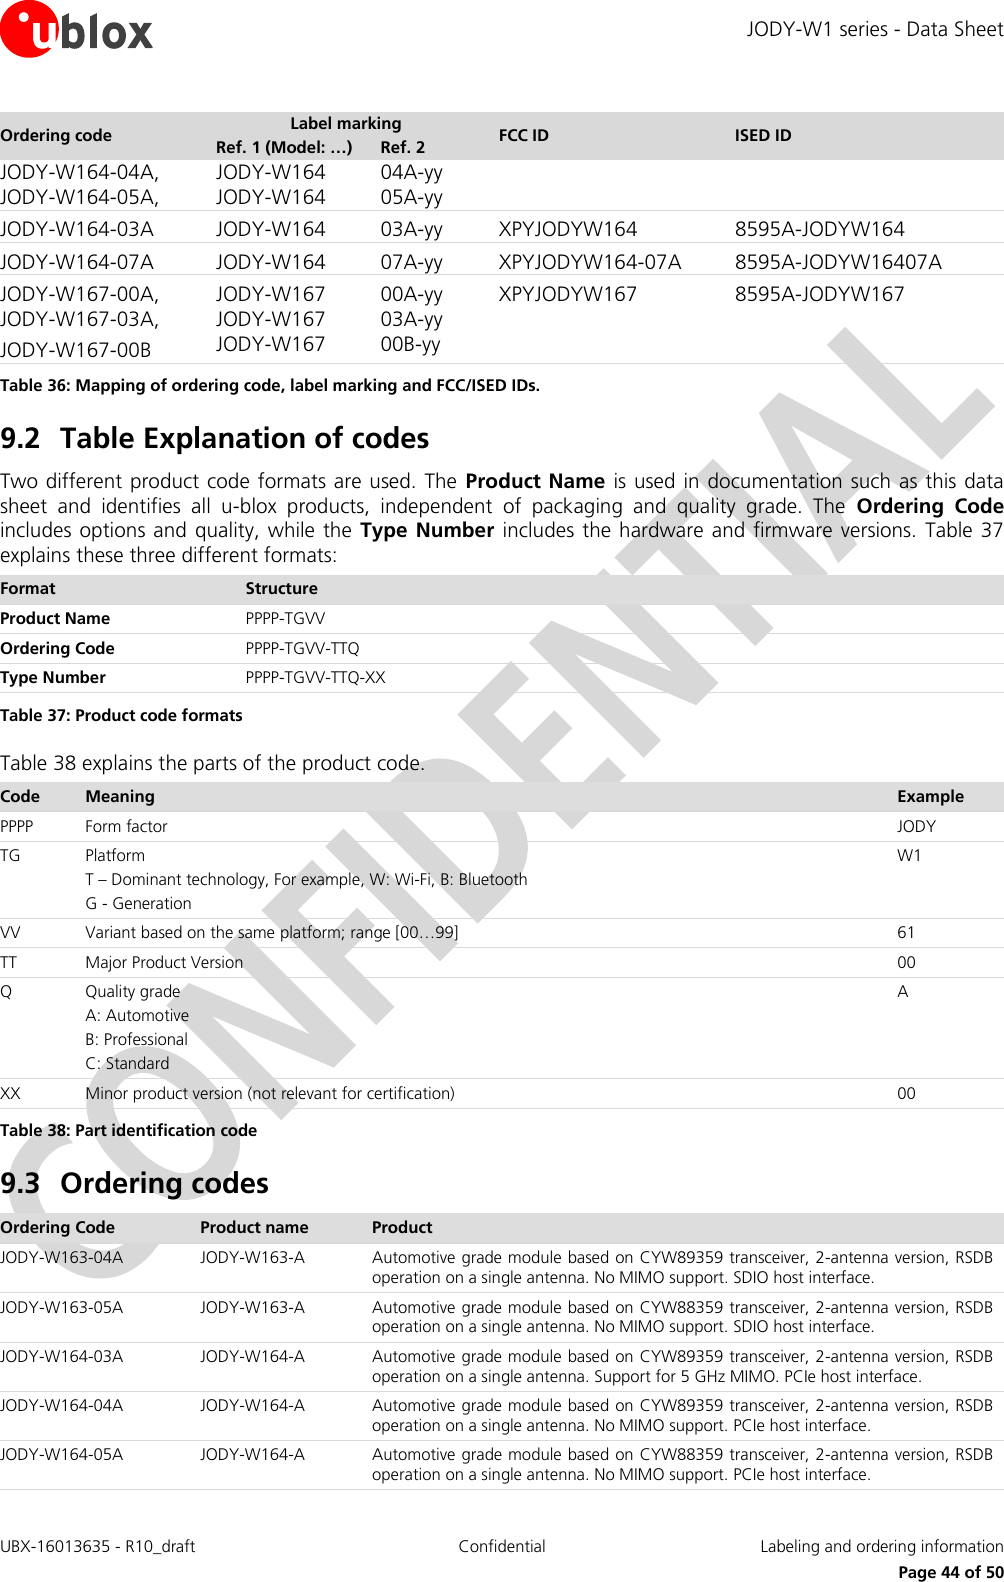 JODY-W1 series - Data Sheet UBX-16013635 - R10_draft Confidential  Labeling and ordering information     Page 44 of 50 Ordering code Label marking FCC ID ISED ID Ref. 1 (Model: …) Ref. 2 JODY-W164-04A, JODY-W164-05A, JODY-W164 JODY-W164 04A-yy 05A-yy JODY-W164-03A JODY-W164 03A-yy XPYJODYW164 8595A-JODYW164 JODY-W164-07A JODY-W164 07A-yy XPYJODYW164-07A 8595A-JODYW16407A JODY-W167-00A, JODY-W167-03A, JODY-W167-00B JODY-W167 JODY-W167 JODY-W167 00A-yy 03A-yy 00B-yy XPYJODYW167 8595A-JODYW167 Table 36: Mapping of ordering code, label marking and FCC/ISED IDs. 9.2 Table Explanation of codes Two different product code formats are used. The  Product Name  is used in documentation such as this data sheet  and  identifies  all  u-blox  products,  independent  of  packaging  and  quality  grade.  The  Ordering  Code includes options  and  quality, while the  Type Number  includes the hardware and firmware  versions.  Table 37 explains these three different formats: Format Structure Product Name PPPP-TGVV Ordering Code PPPP-TGVV-TTQ Type Number PPPP-TGVV-TTQ-XX Table 37: Product code formats Table 38 explains the parts of the product code. Code Meaning Example PPPP Form factor JODY TG Platform T – Dominant technology, For example, W: Wi-Fi, B: Bluetooth G - Generation W1 VV Variant based on the same platform; range [00…99] 61 TT Major Product Version 00 Q Quality grade A: Automotive B: Professional C: Standard A XX Minor product version (not relevant for certification) 00 Table 38: Part identification code 9.3 Ordering codes Ordering Code Product name Product JODY-W163-04A JODY-W163-A Automotive grade module based on CYW89359 transceiver, 2-antenna version, RSDB operation on a single antenna. No MIMO support. SDIO host interface. JODY-W163-05A JODY-W163-A Automotive grade module based on CYW88359 transceiver, 2-antenna version, RSDB operation on a single antenna. No MIMO support. SDIO host interface. JODY-W164-03A JODY-W164-A Automotive grade module based on CYW89359 transceiver, 2-antenna version, RSDB operation on a single antenna. Support for 5 GHz MIMO. PCIe host interface. JODY-W164-04A JODY-W164-A Automotive grade module based on CYW89359 transceiver, 2-antenna version, RSDB operation on a single antenna. No MIMO support. PCIe host interface. JODY-W164-05A JODY-W164-A Automotive grade module based on CYW88359 transceiver, 2-antenna version, RSDB operation on a single antenna. No MIMO support. PCIe host interface. 